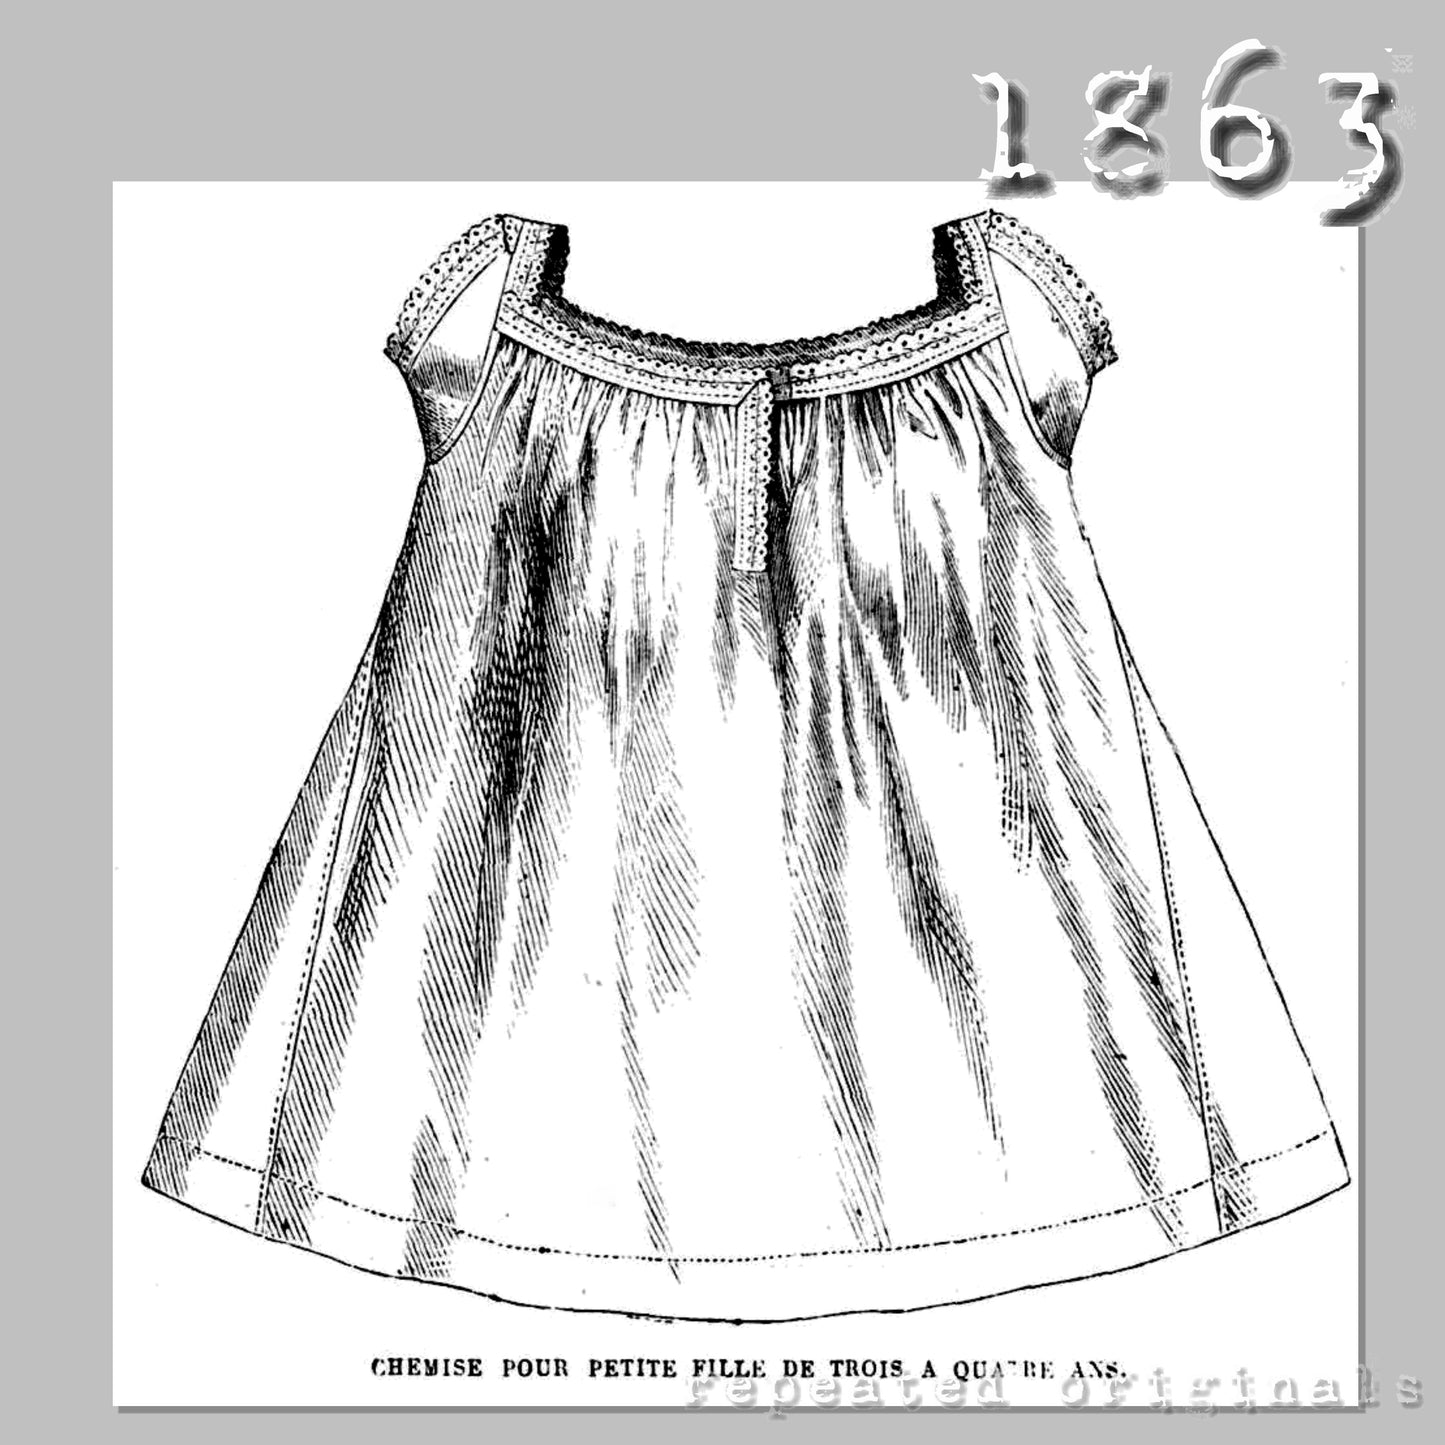 1863 Chemise for Girl 3 - 4 Years - INSTANT DOWNLOAD PDF